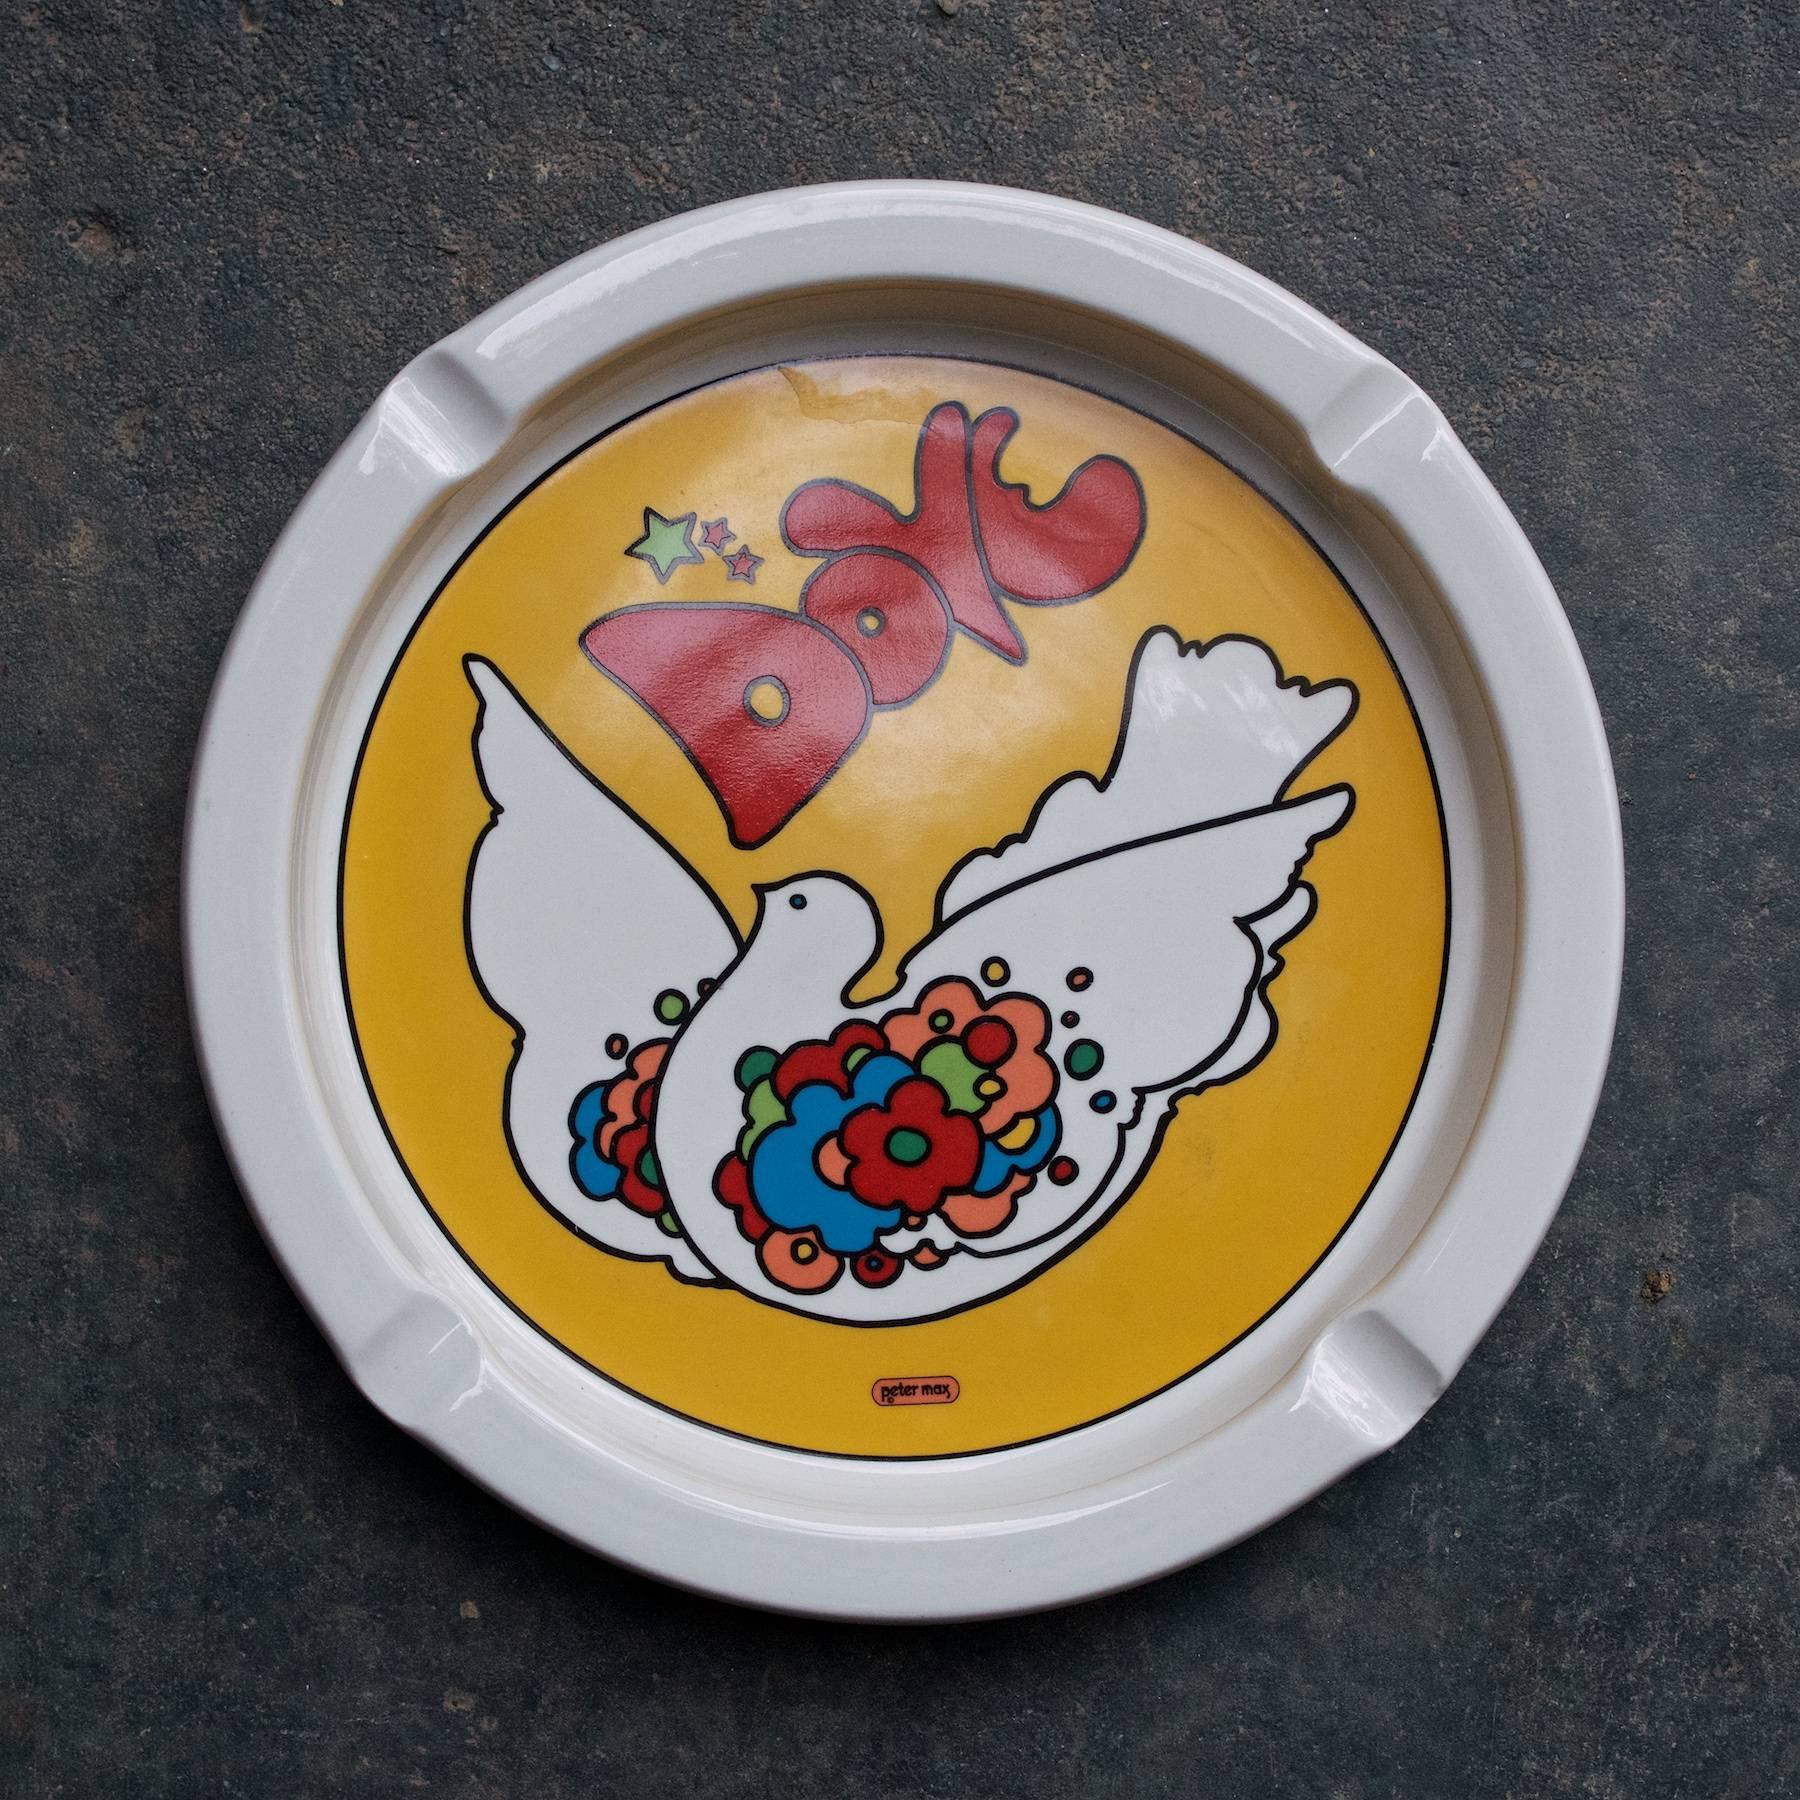 Late 1960s bird of peace dove ashtray by Peter Max psychedelic Pop Art graphic. More Sought after larger 10 inch size.